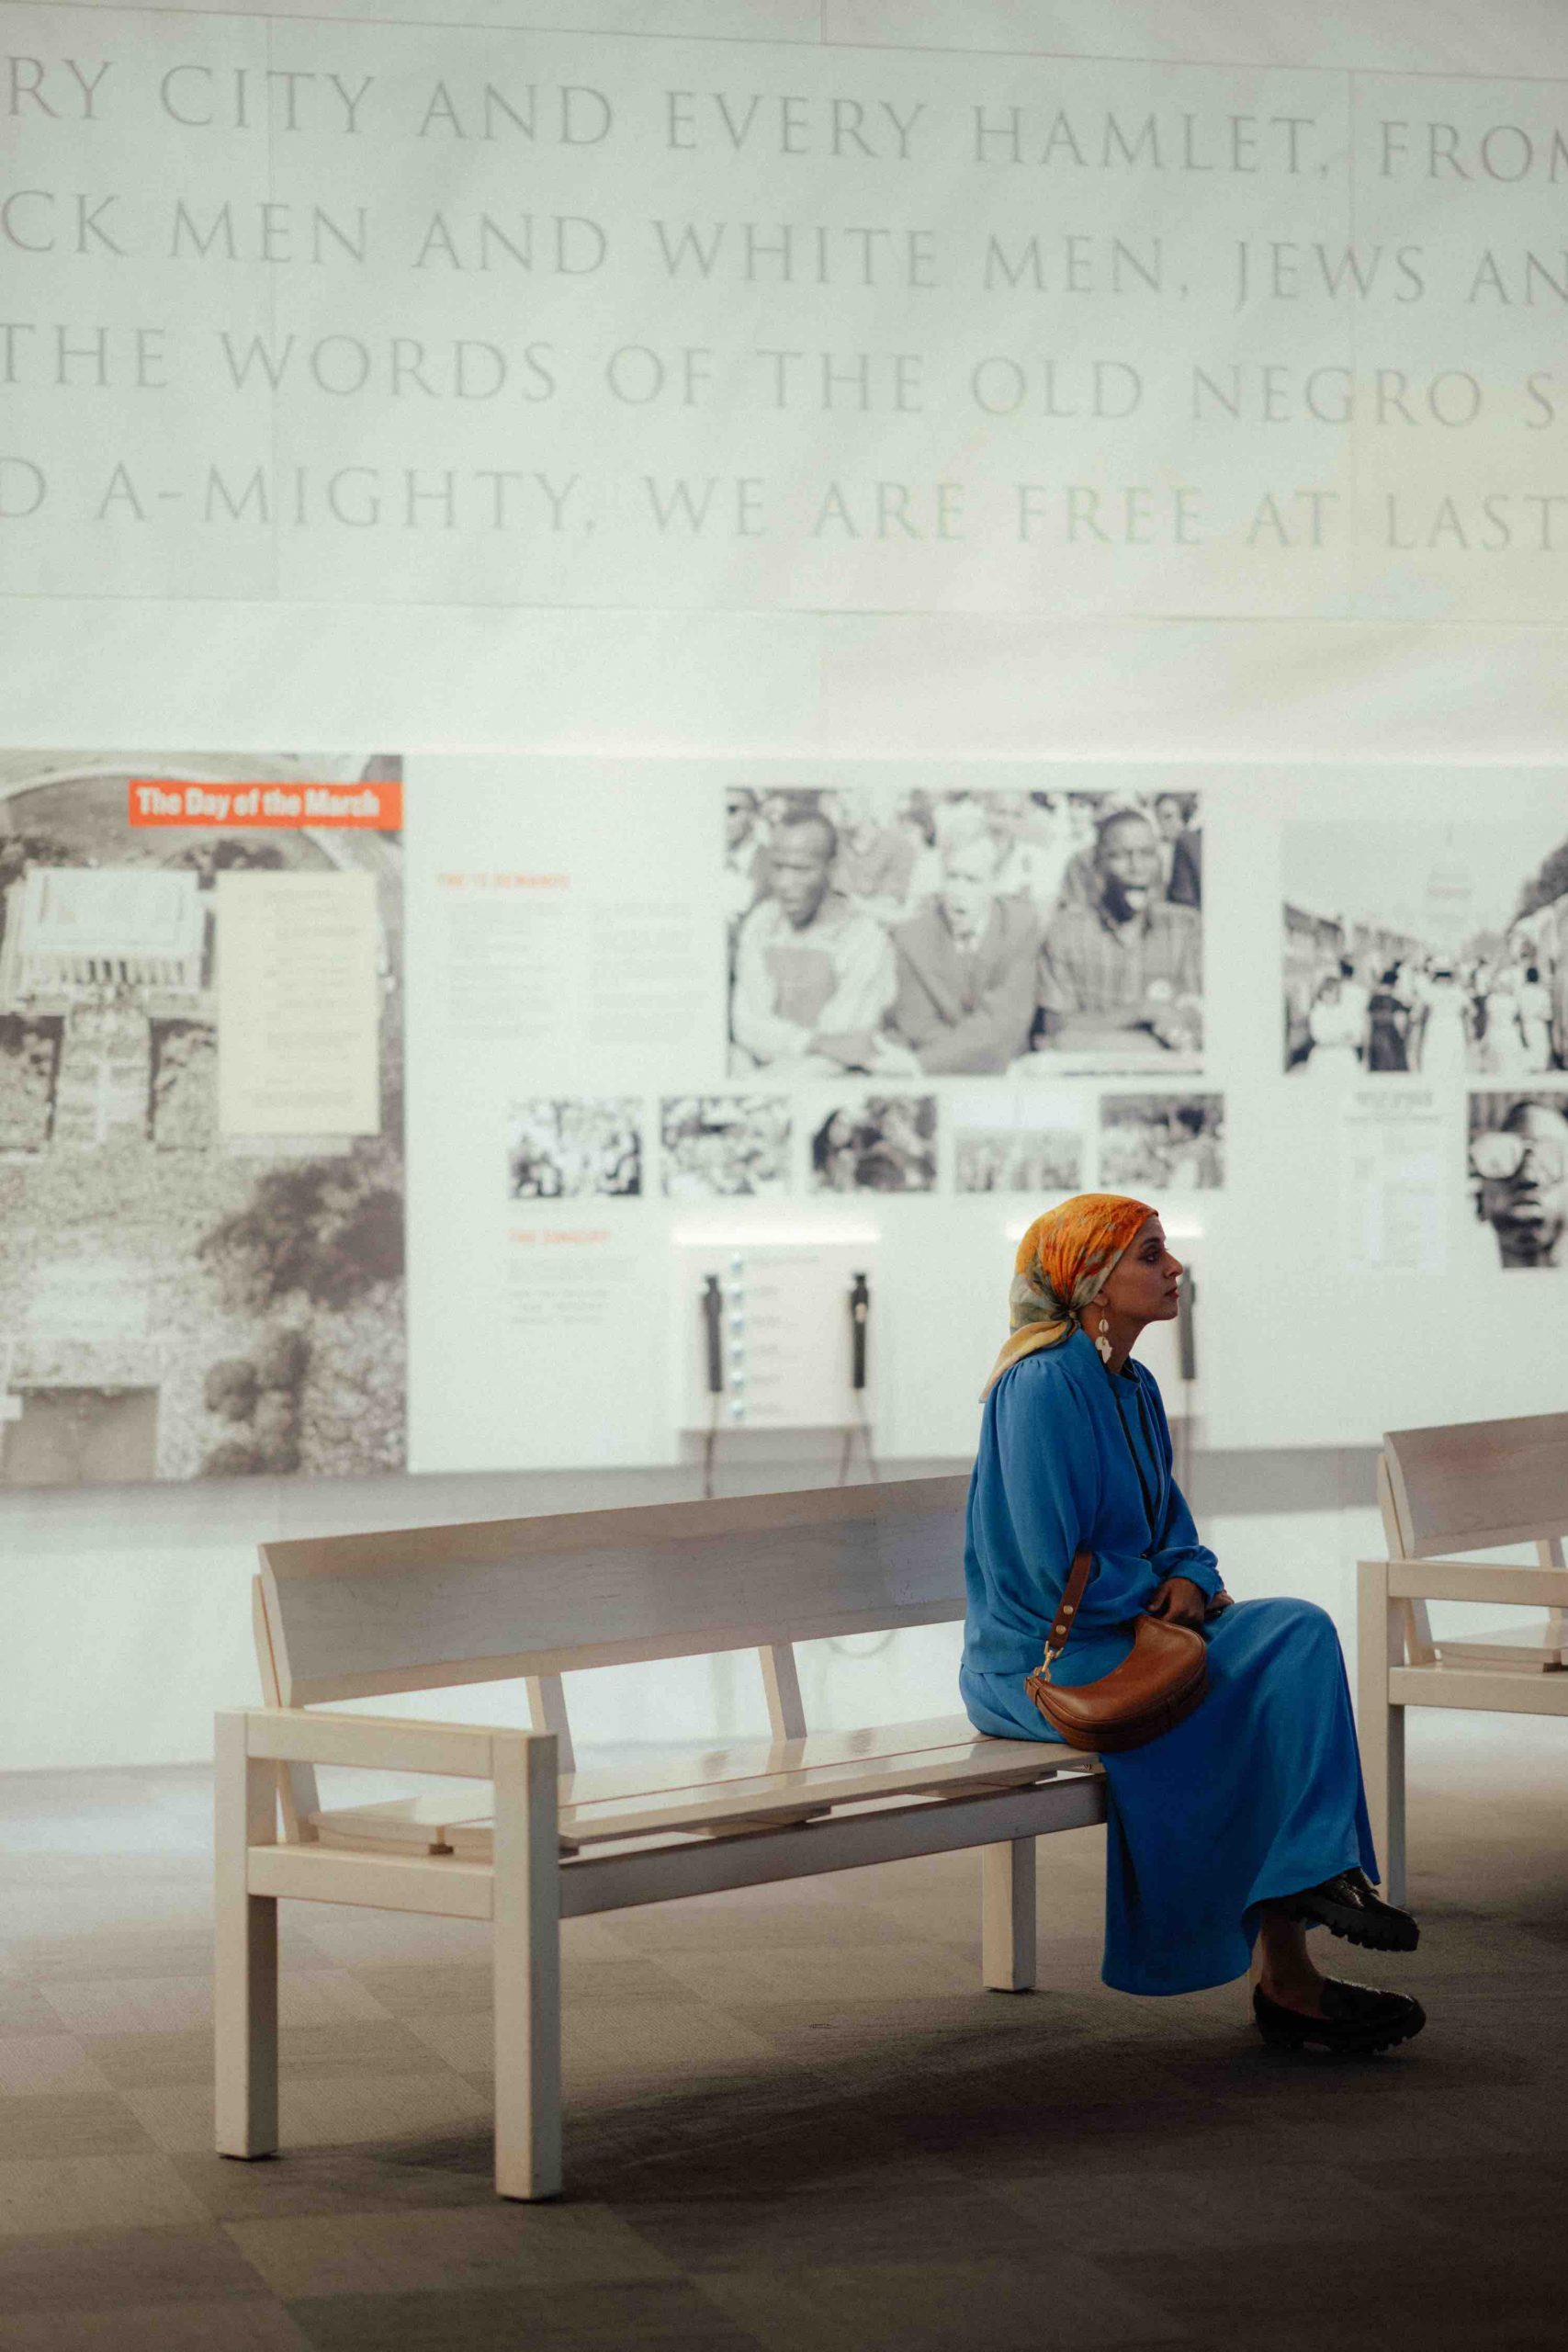 Malikah's Rana Abdelhamid sits contemplatively on a bench in the National Center for Civil and Human Rights